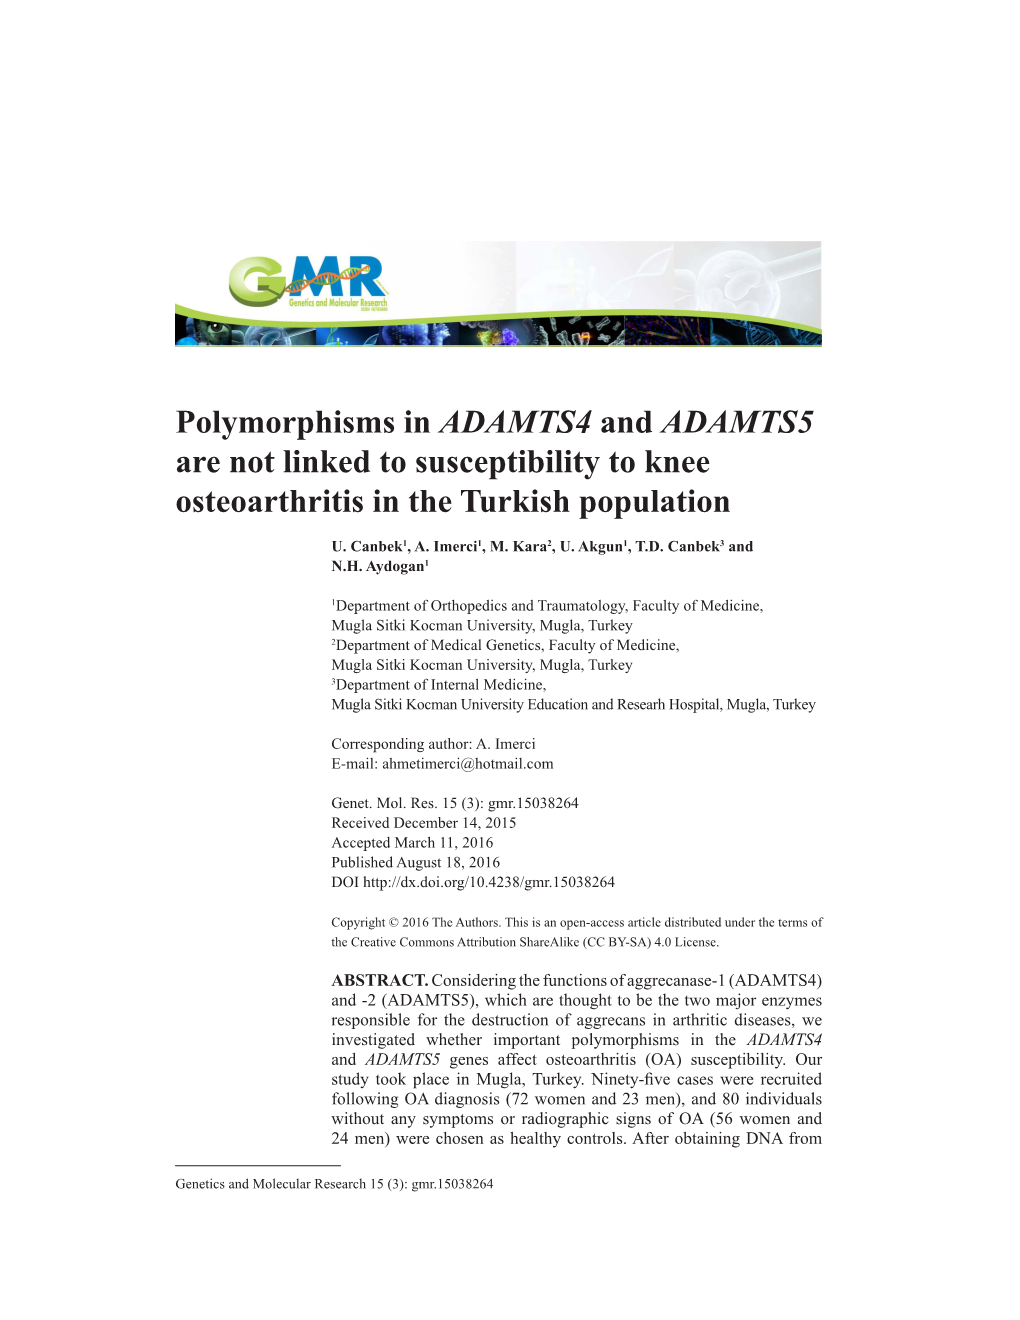 Polymorphisms in ADAMTS4 and ADAMTS5 Are Not Linked to Susceptibility to Knee Osteoarthritis in the Turkish Population